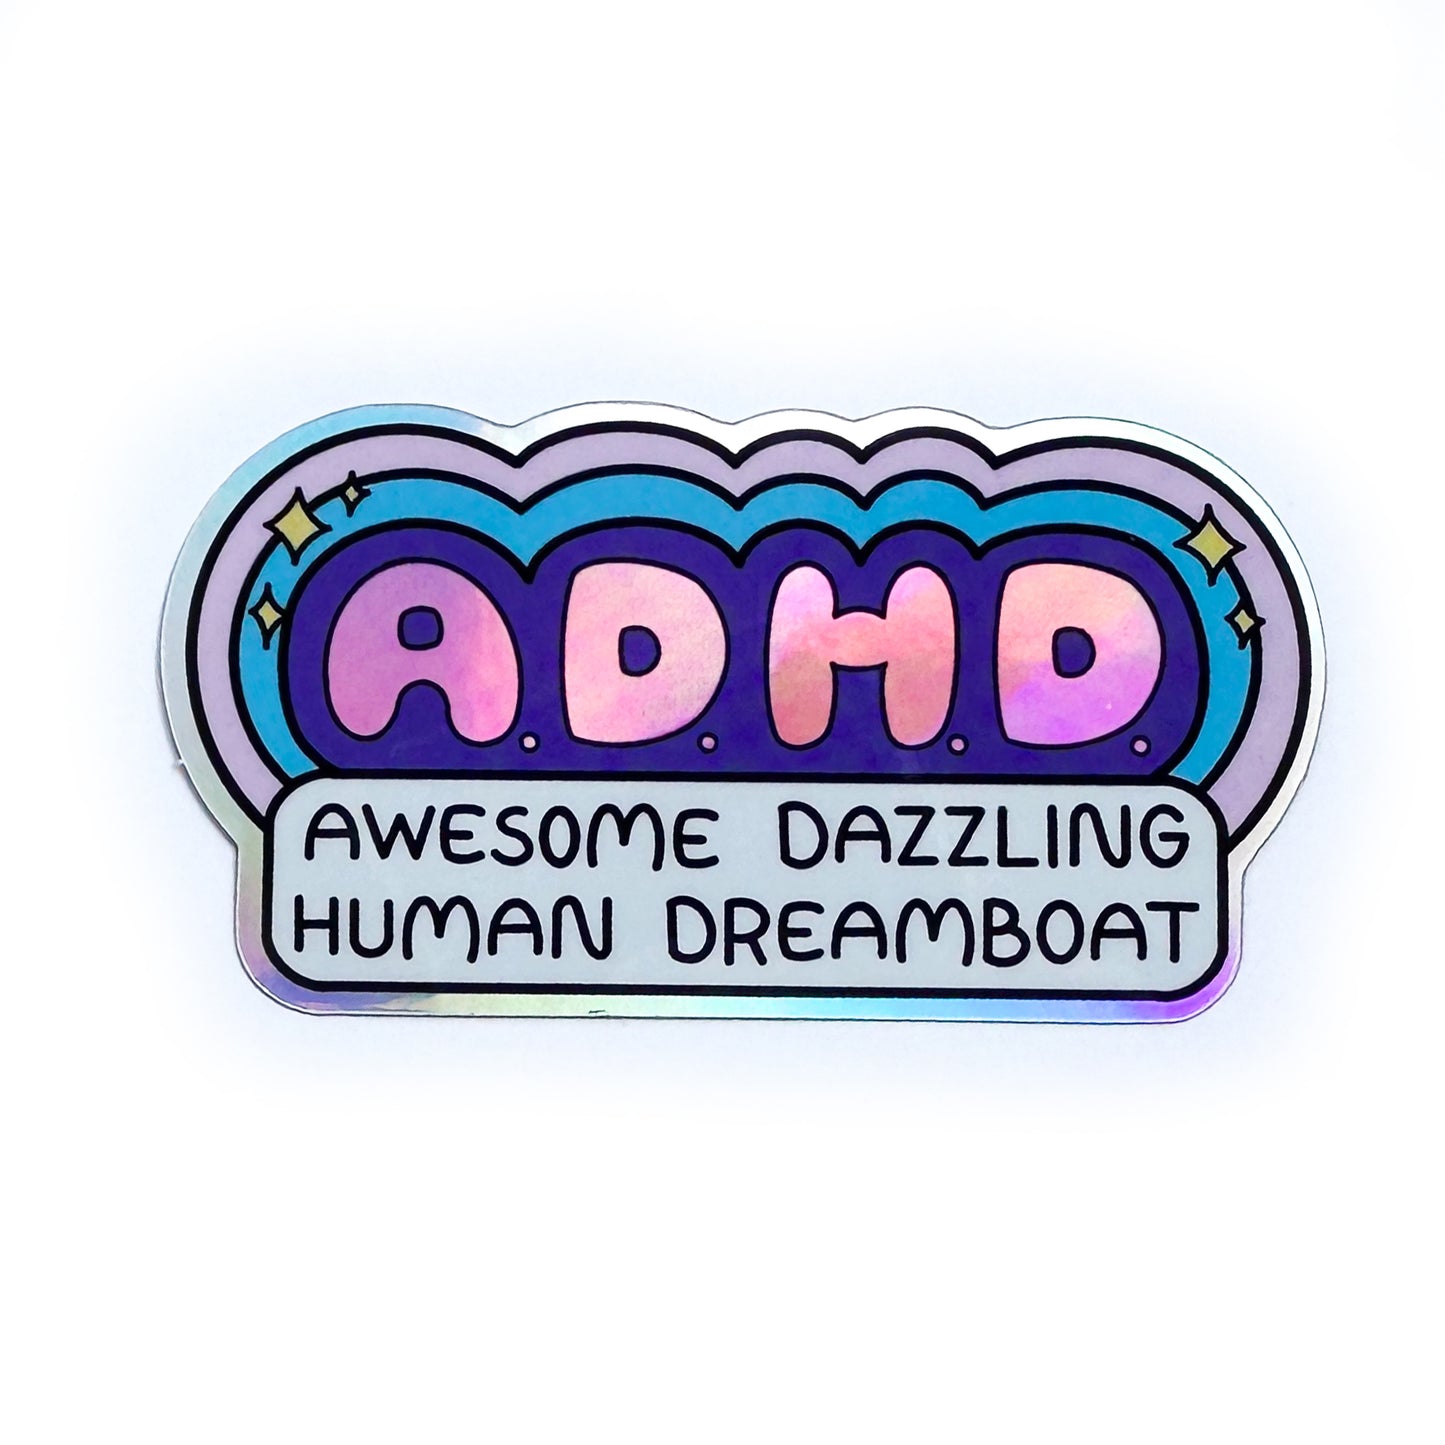 A holographic vinyl sticker with pink bubble letters that read "A.D.H.D." surrounded by bubbles in blue and lavender and sparkles. Below this are the words "Awesome Dazzling Human Dreamboat" 